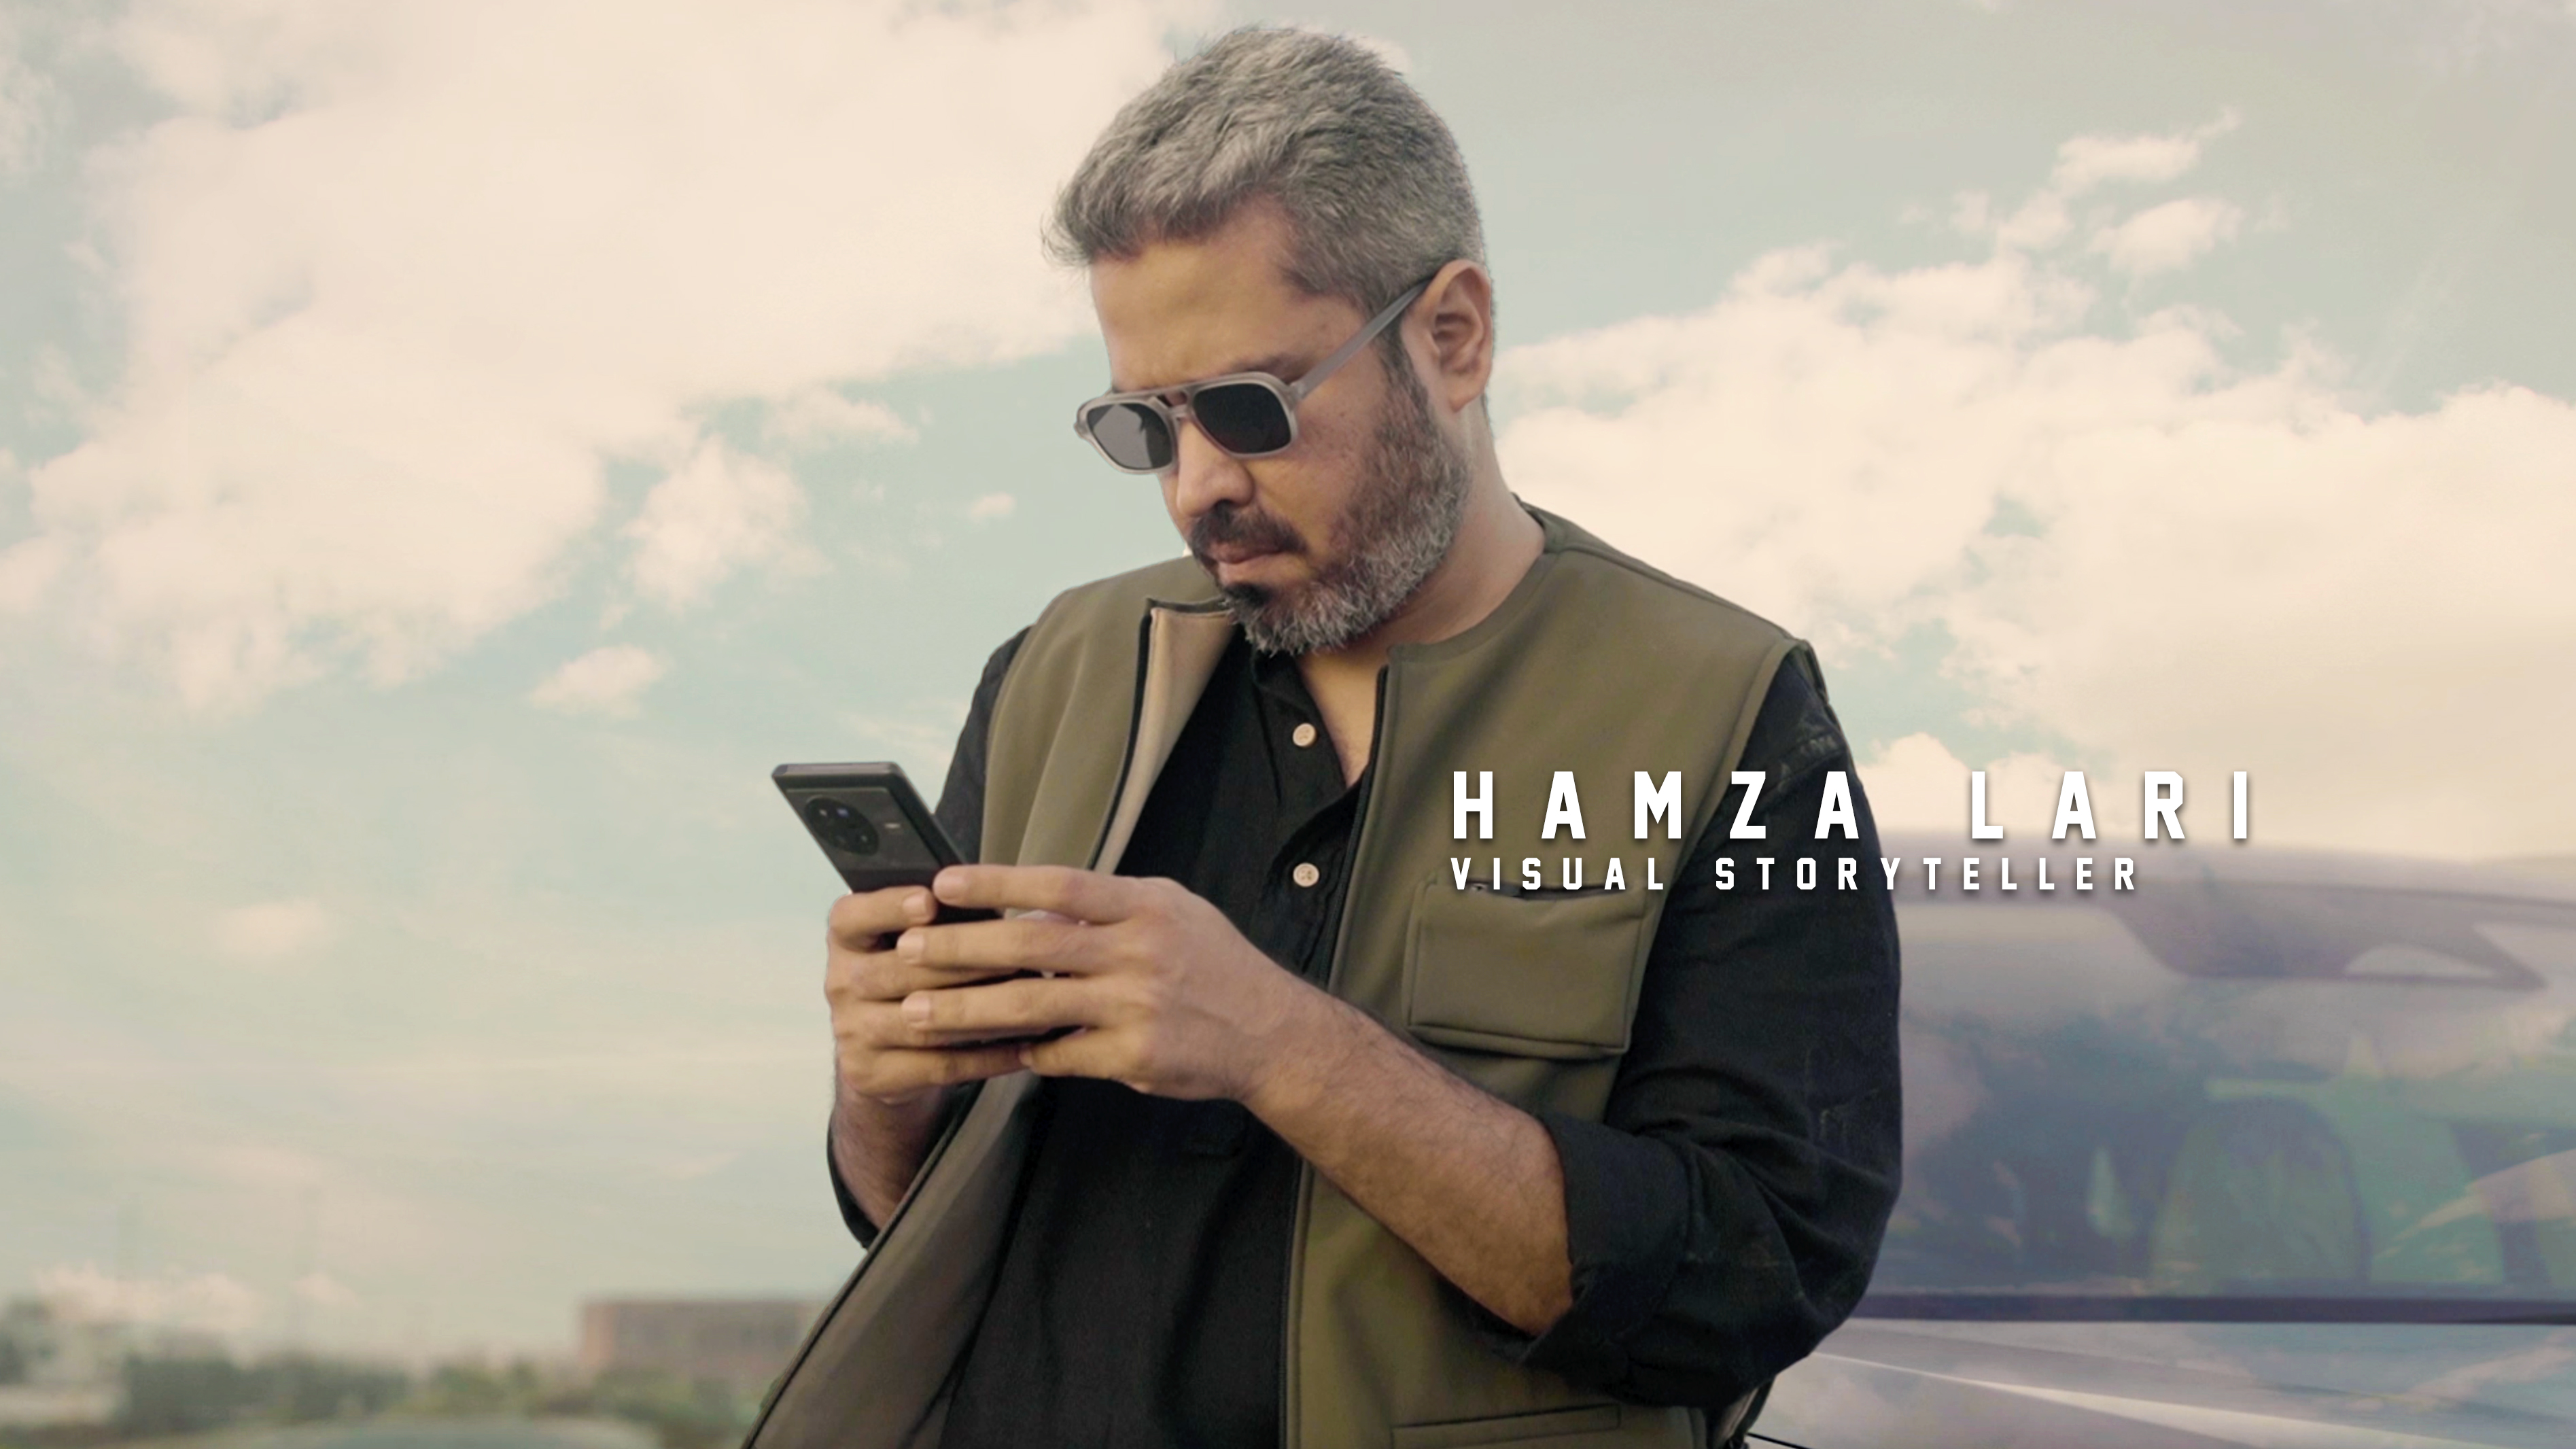 vivo Announced an Exciting Short Film Project with An Ace Director Hamza Lari in Pakistan to Bring Mobile Filmmaking Vision to Reality